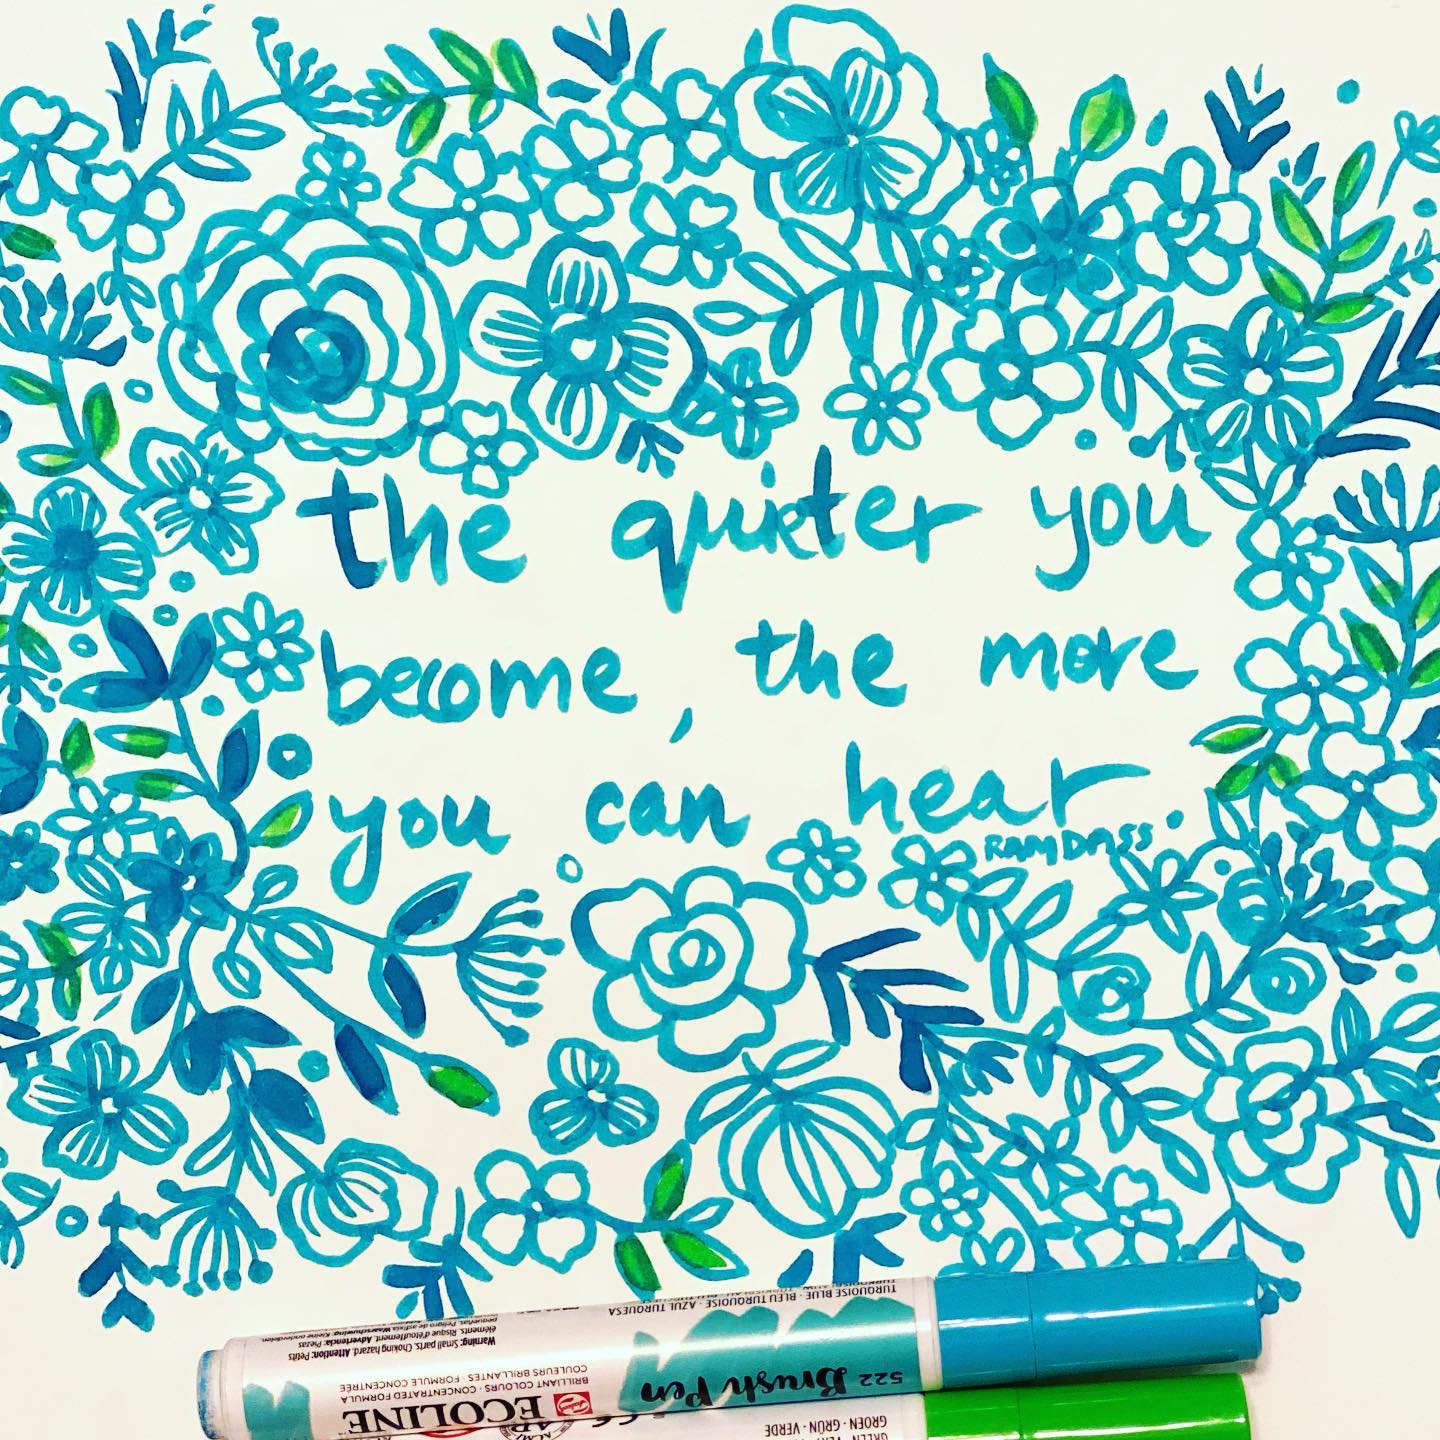 The quieter you become, the more you can hear.
- Ram Dass